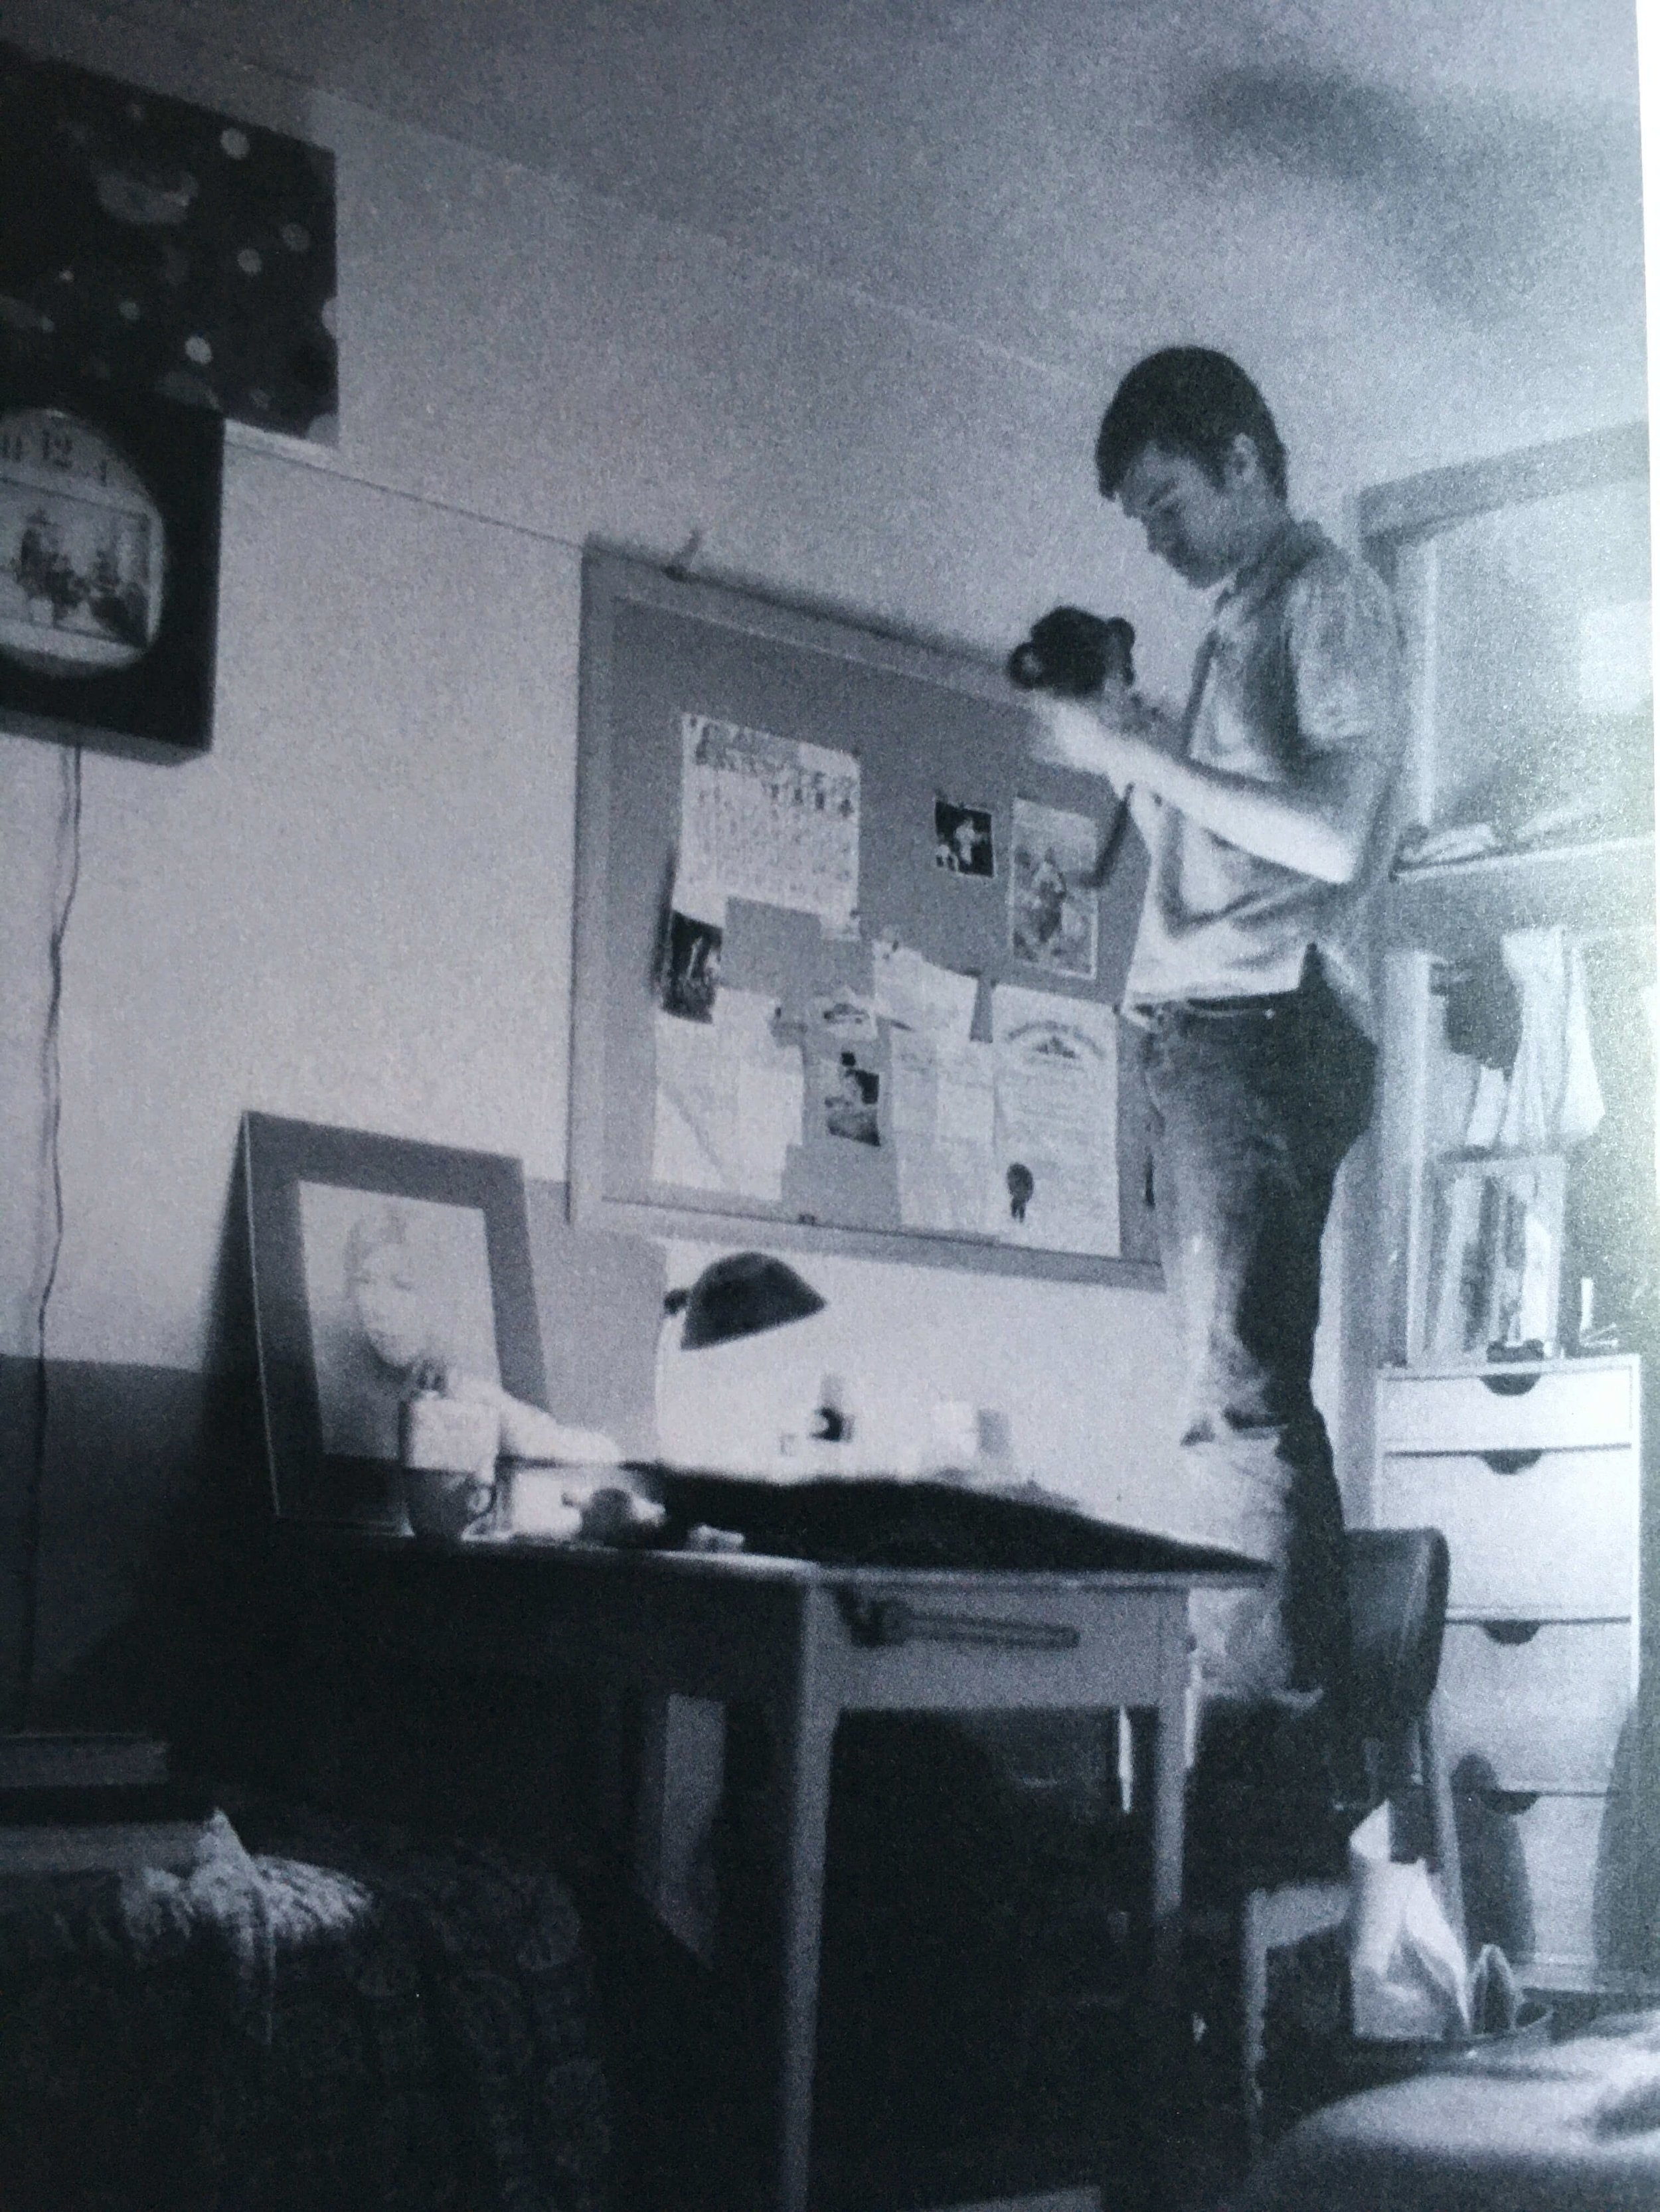 A young Gus Van Sant taking a photo